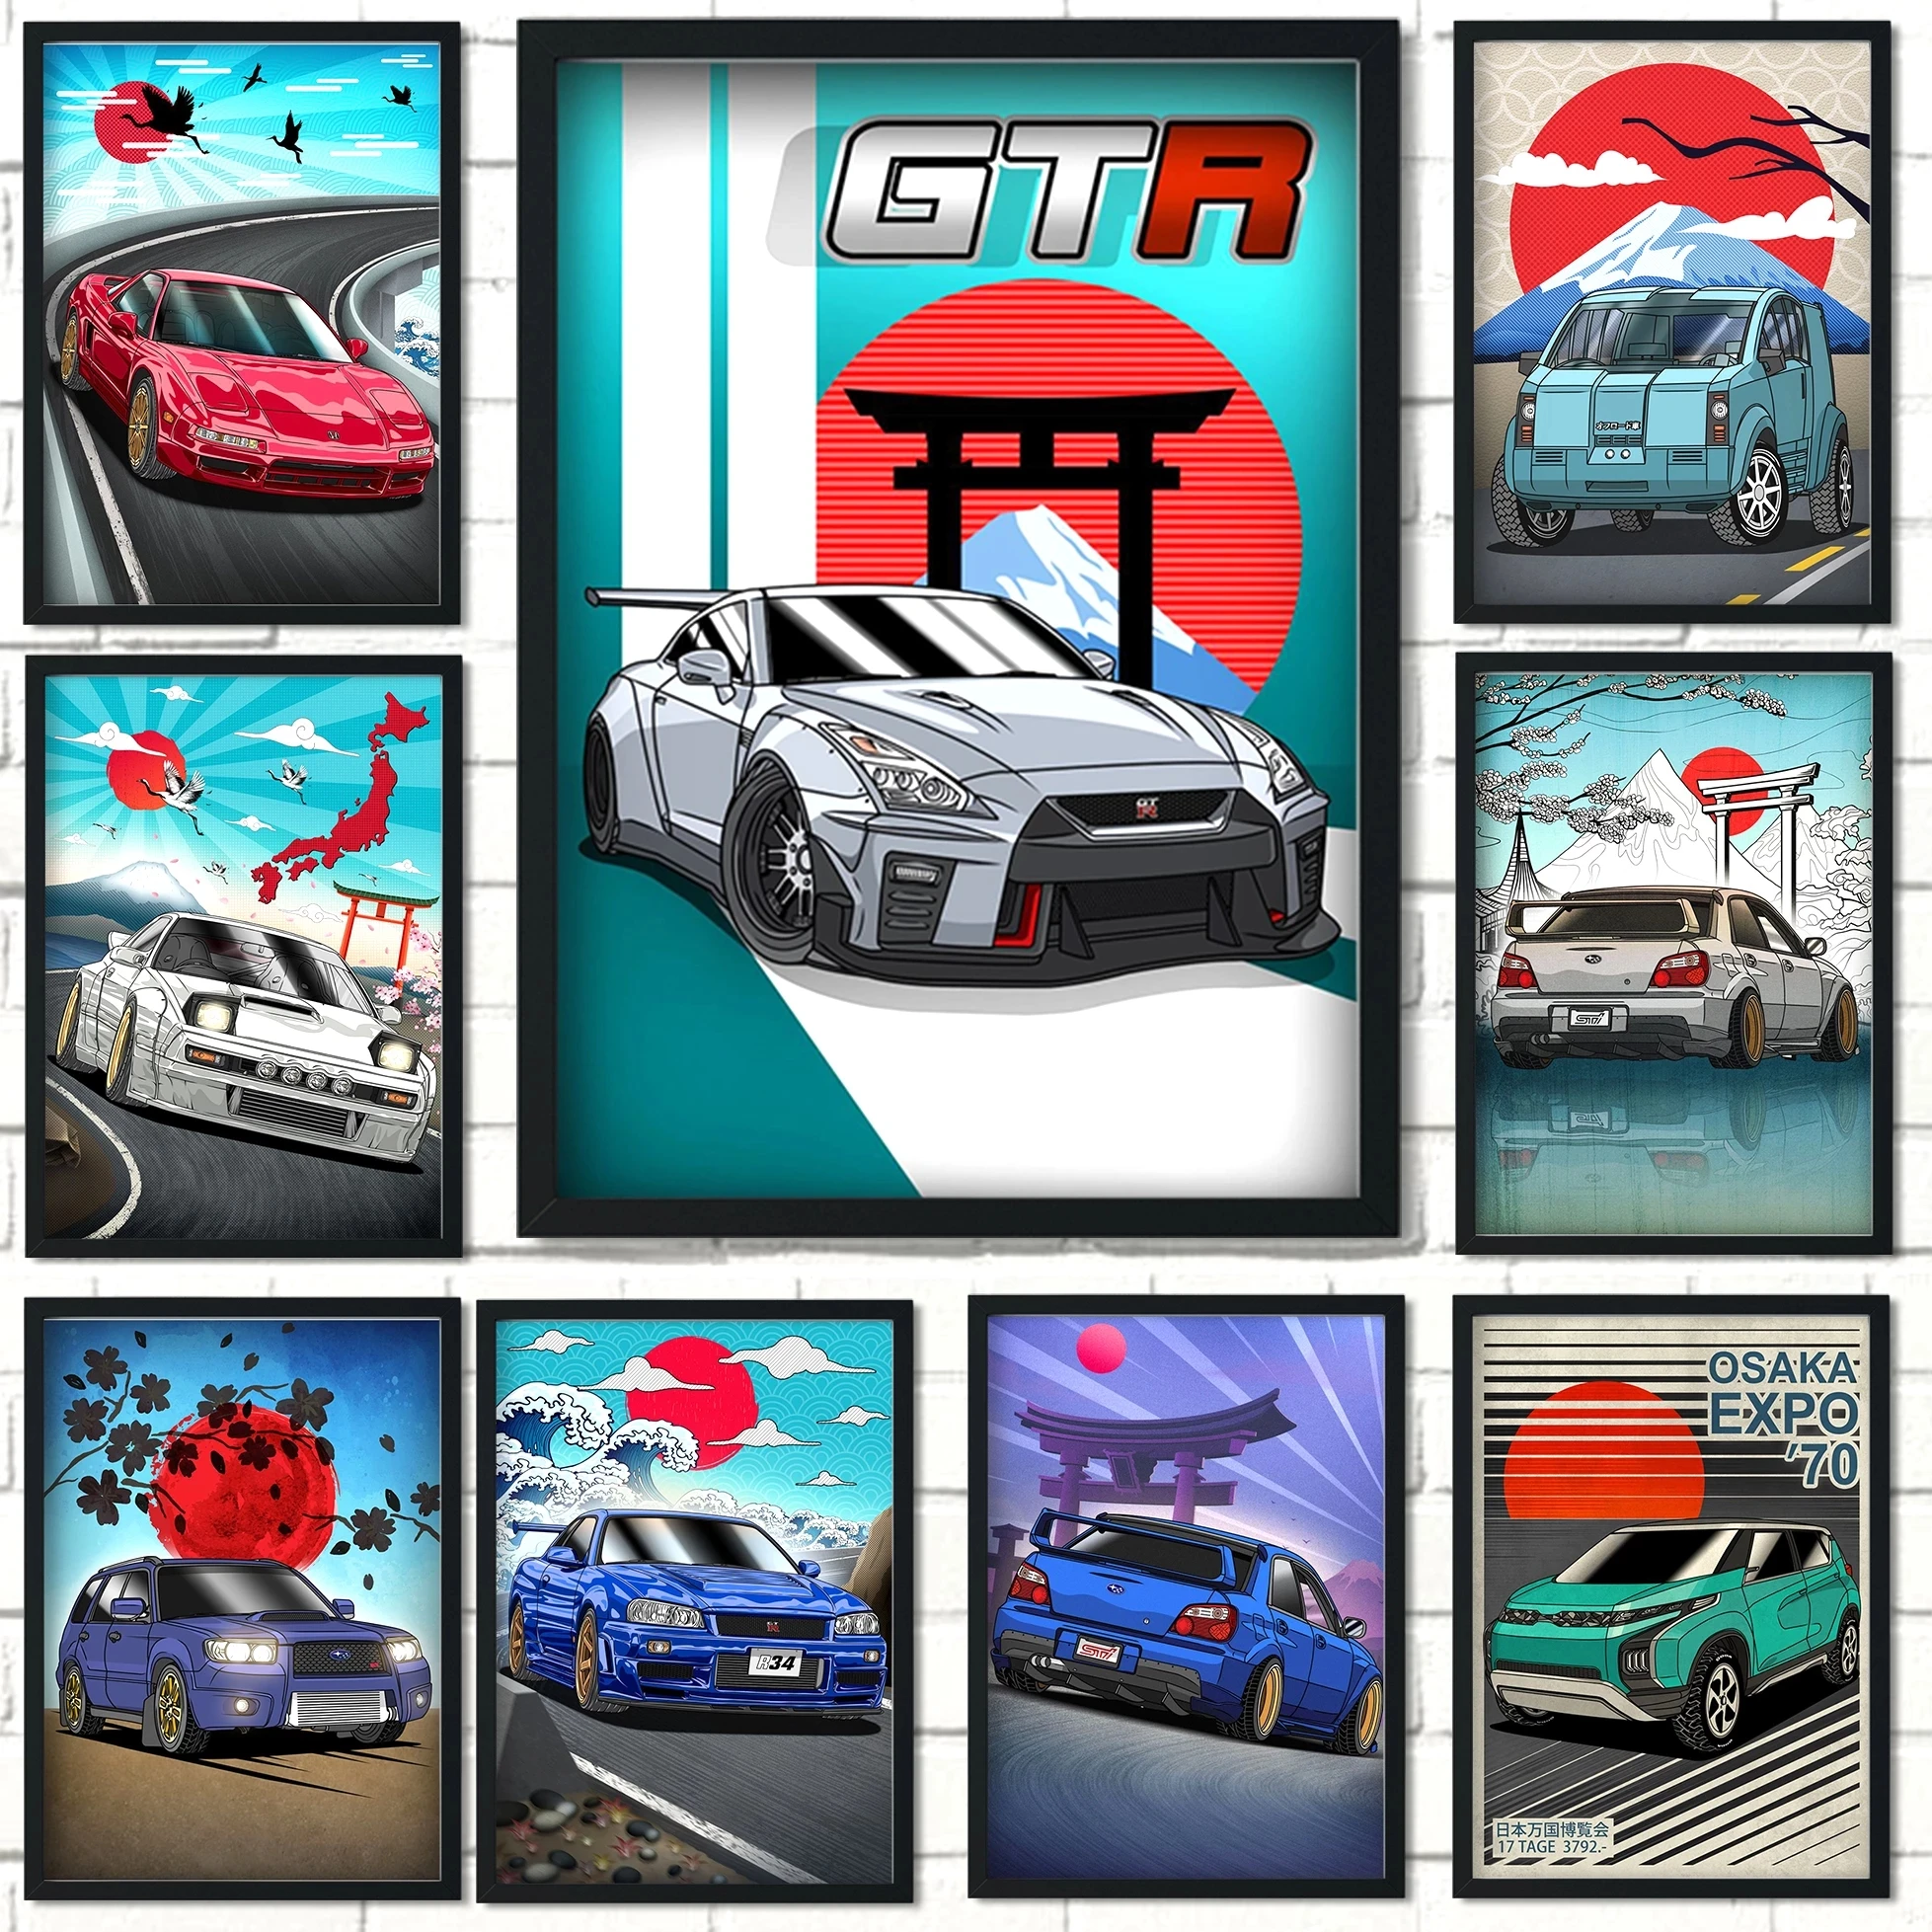 

Street Car Racing GTR SUV 80S Synthwave Neon Poster Decoration Wall Art Home Decor Painting Kawaii Room Decor Canvas Poster